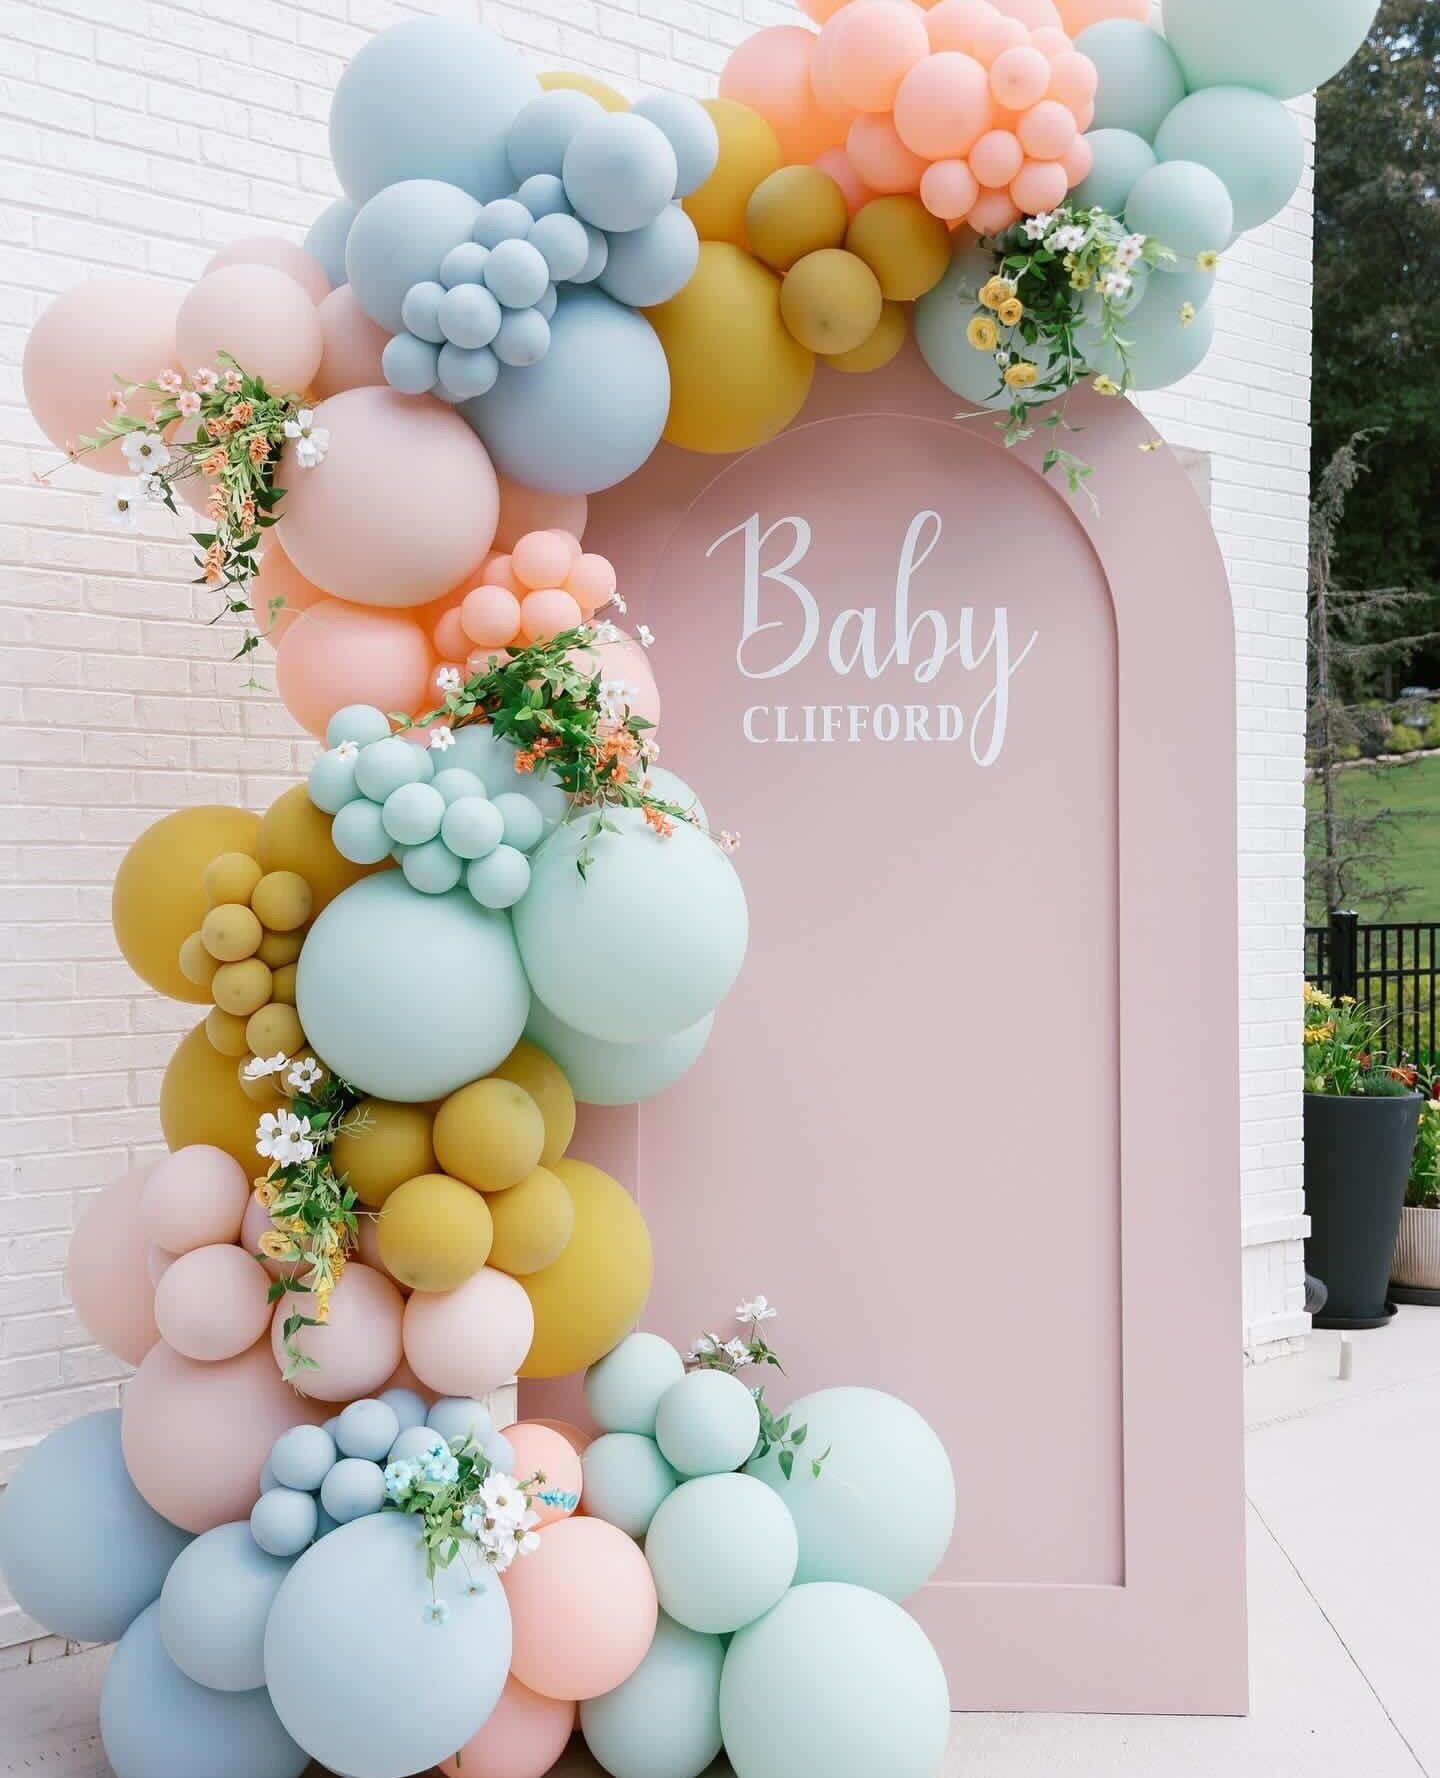 🎉 Hey all party lovers! 🎉⁠
⁠
Want to throw an amazing baby shower? 🌸 Check out our awesome collection of baby shower backdrops that will guarantee a day full of love, joy, and unforgettable memories. 🤩✨⁠
⁠
#babyshower #background #partydecor #cel